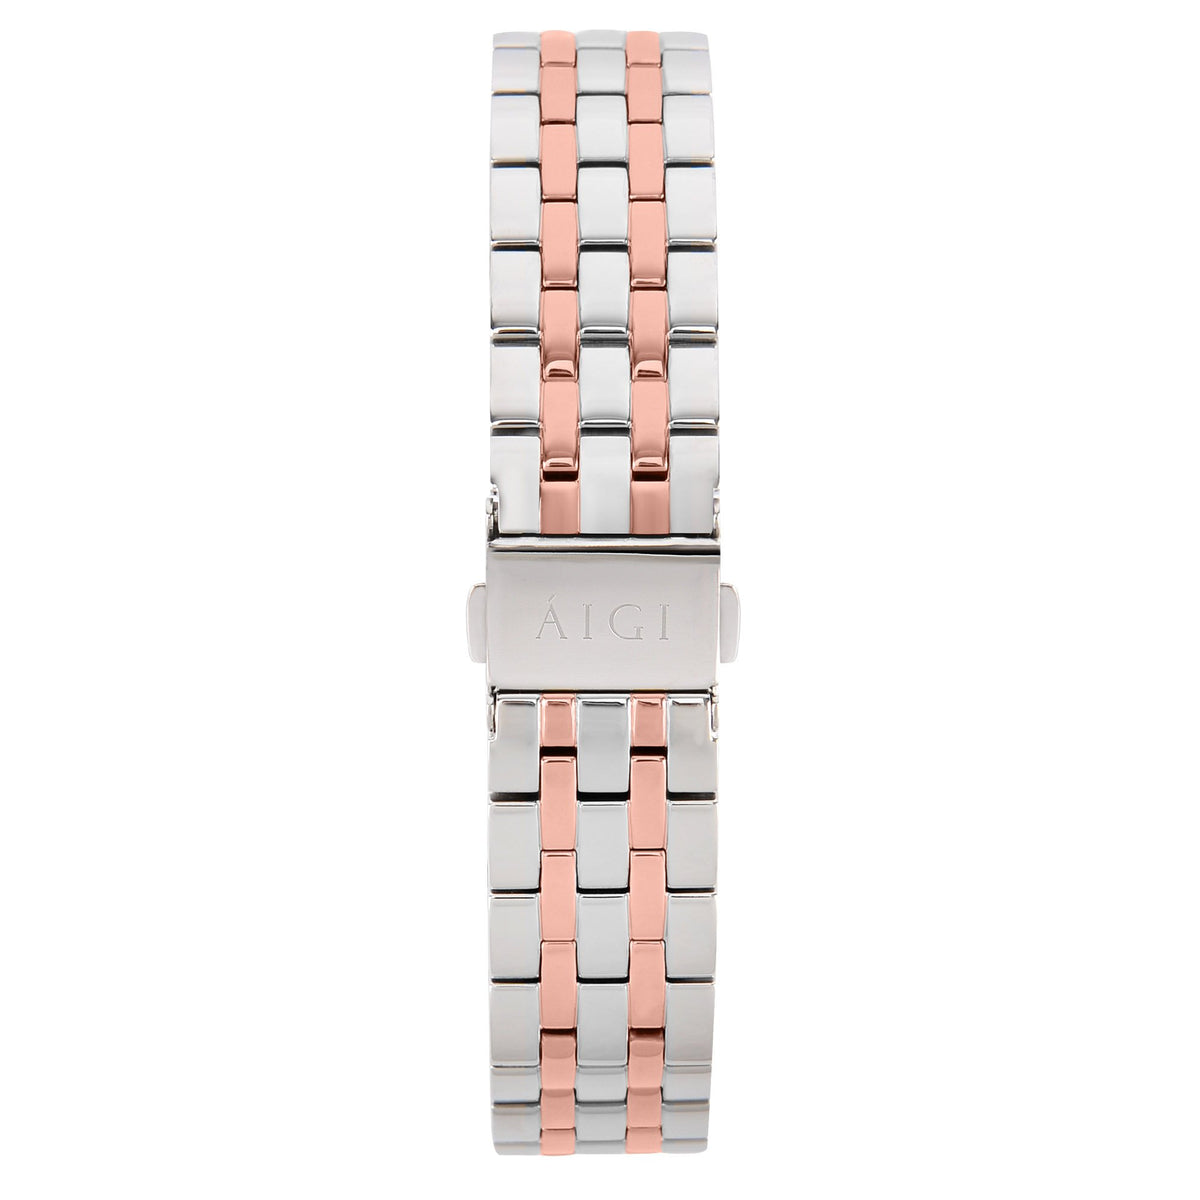 STEEL STRAP 18MM - TWO TONE ROSEGOLD